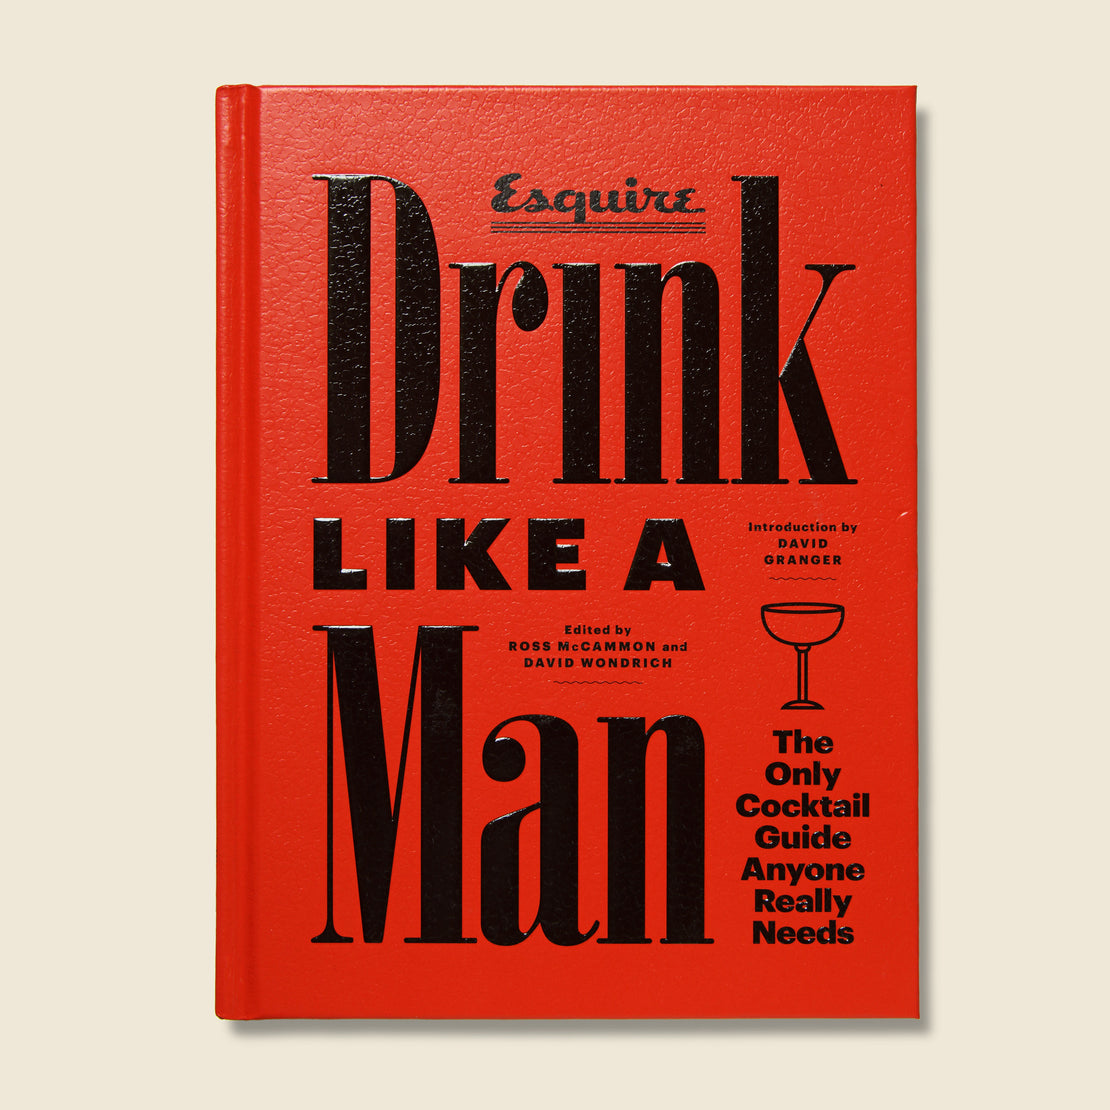 Bookstore Drink Like A Man - Esquire